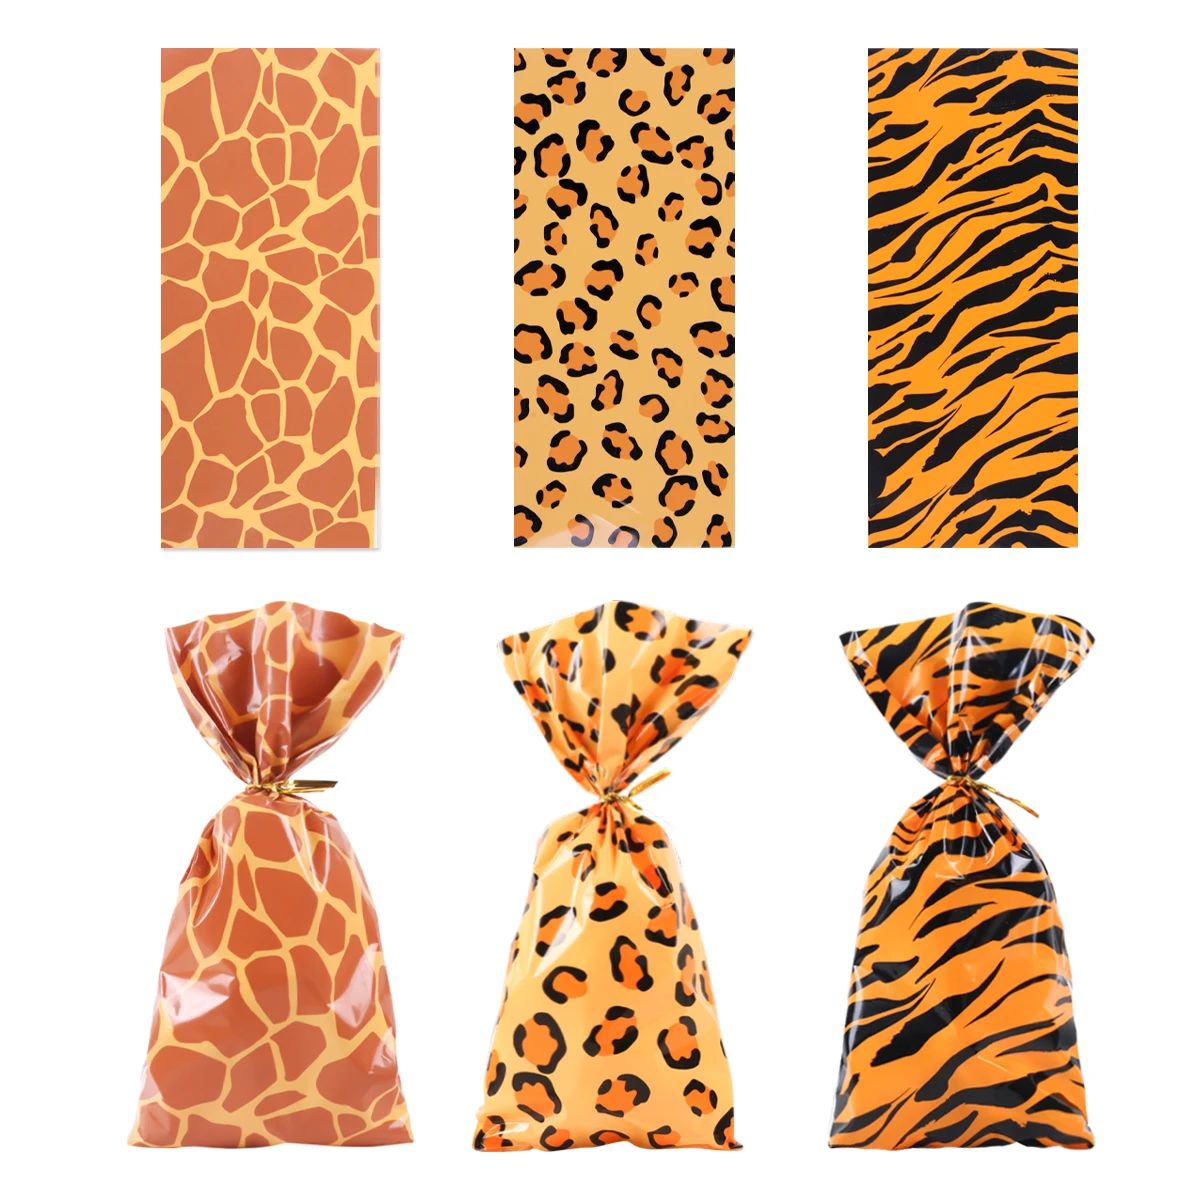 

50pcs Jungle Party Decoration Candy Cookies Gift Bags Tiger Leopard Paper Bag Animal Jungle Theme Birthday Party Favors Gift Bag